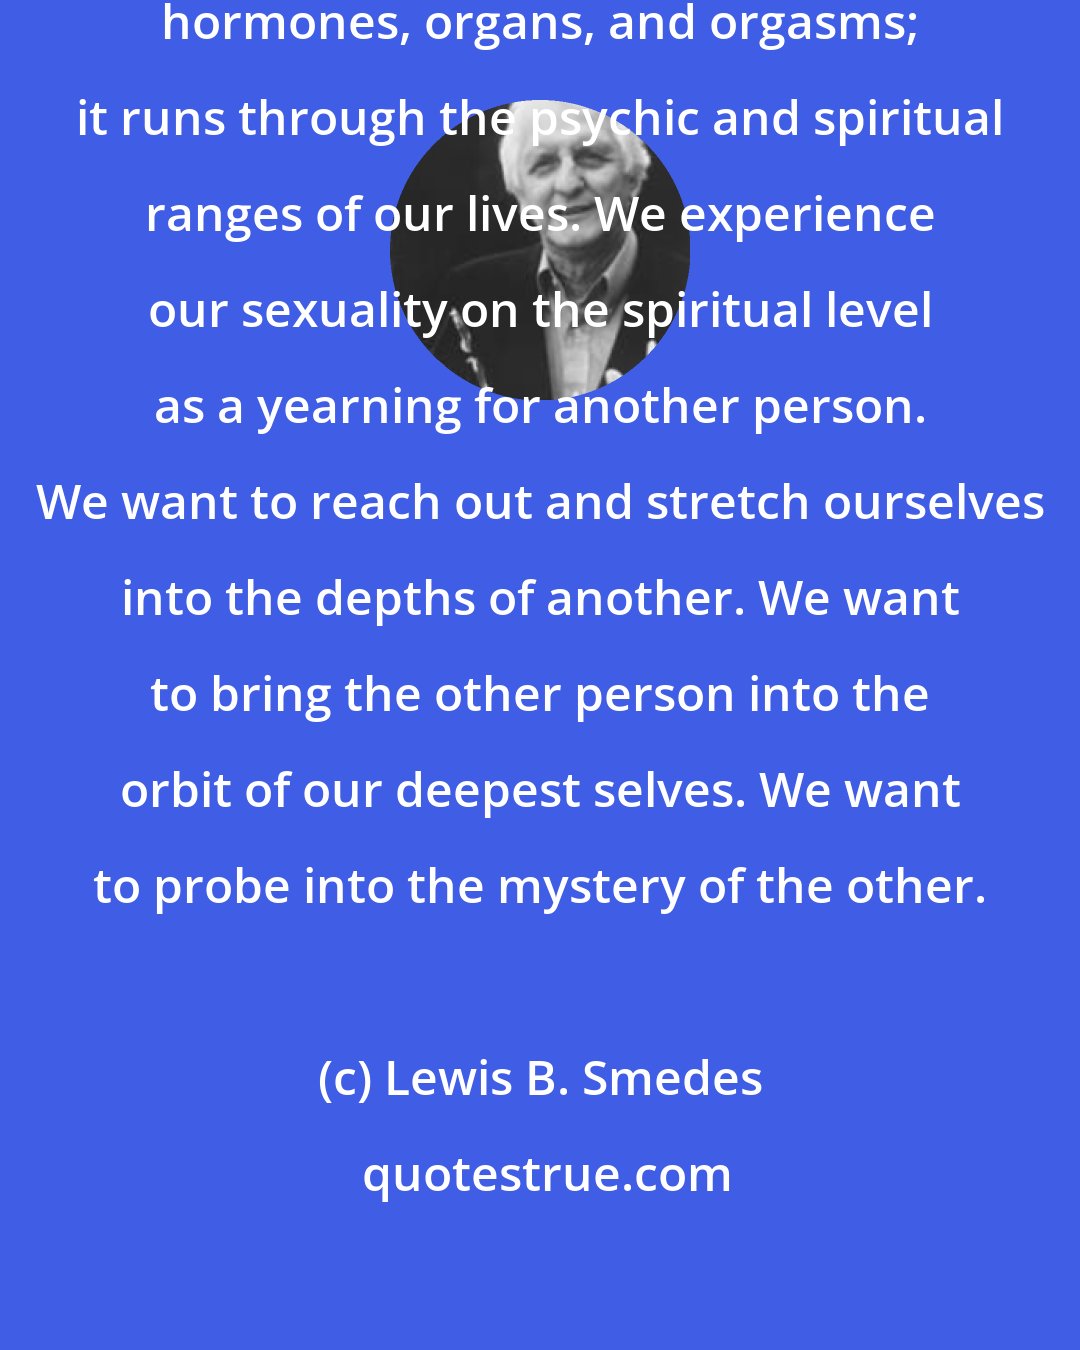 Lewis B. Smedes: Human sexuality includes more than hormones, organs, and orgasms; it runs through the psychic and spiritual ranges of our lives. We experience our sexuality on the spiritual level as a yearning for another person. We want to reach out and stretch ourselves into the depths of another. We want to bring the other person into the orbit of our deepest selves. We want to probe into the mystery of the other.